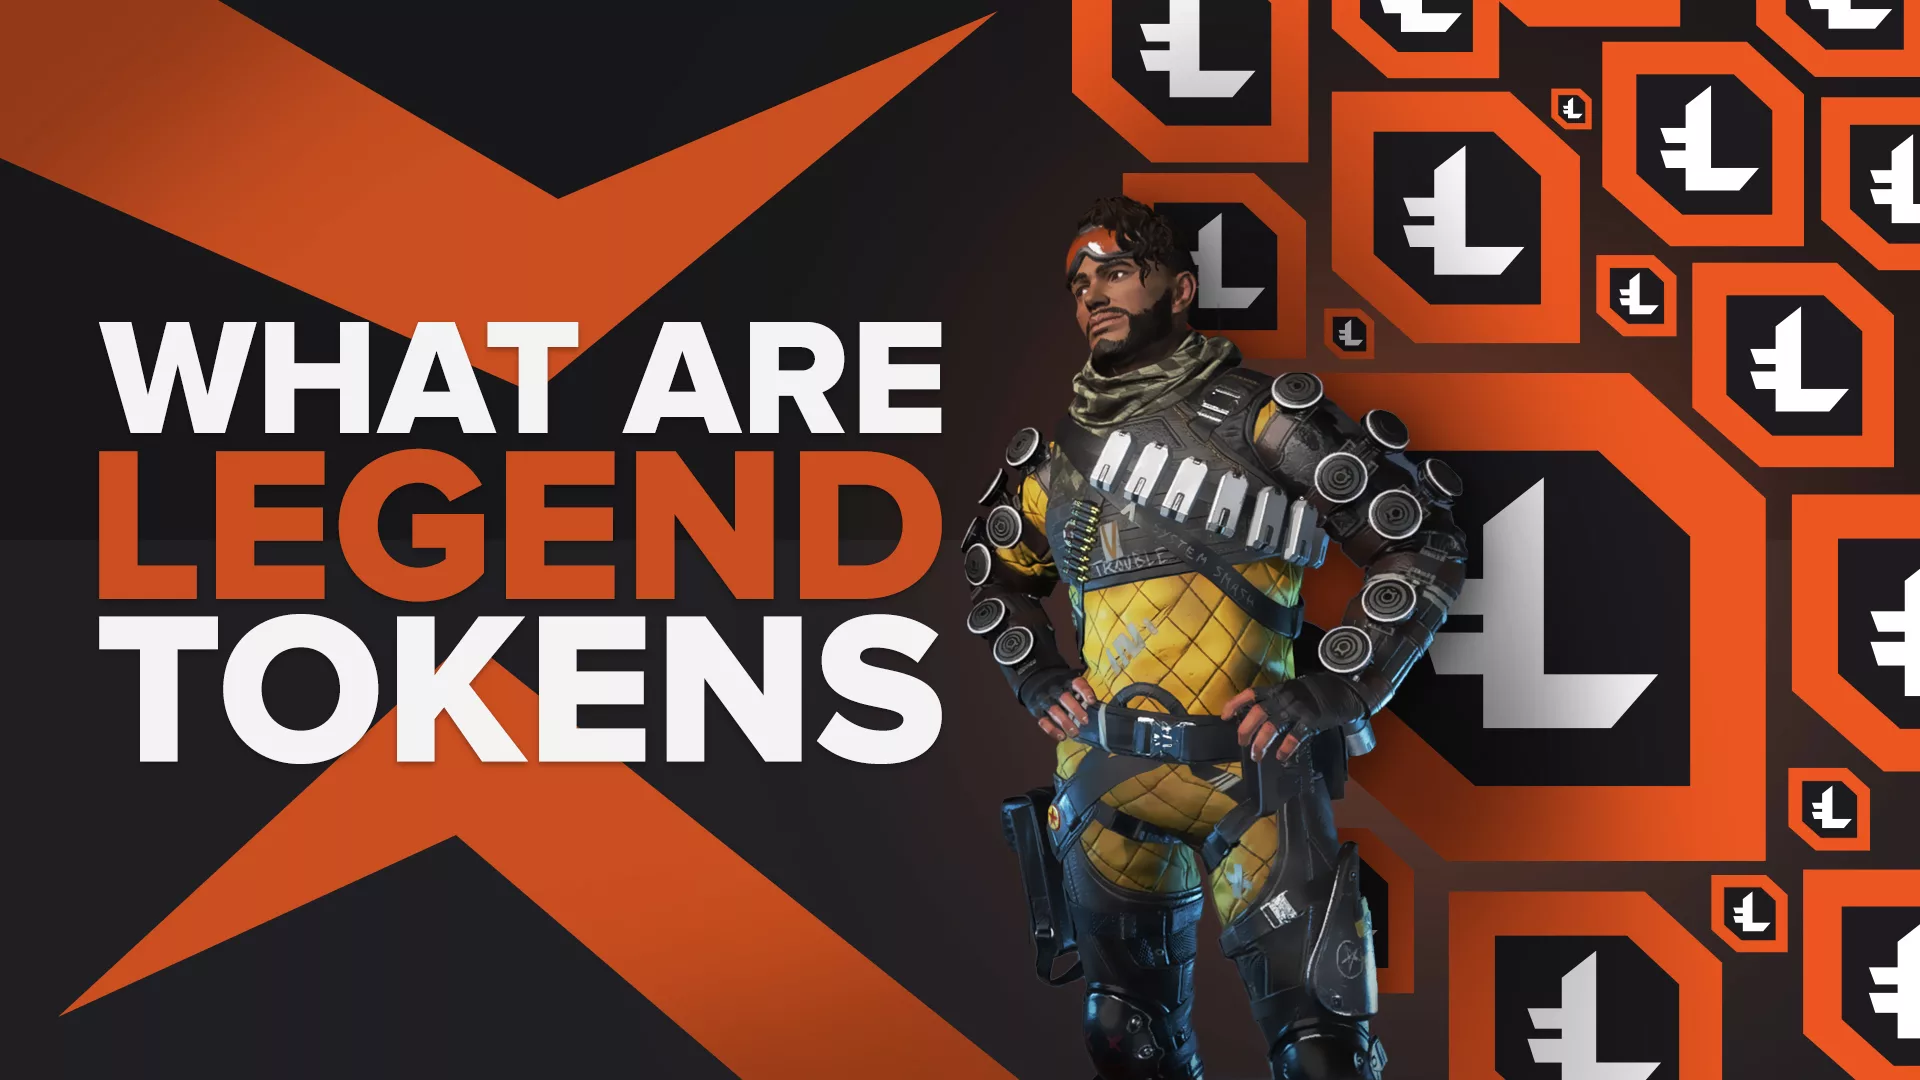 What are Legend Tokens in Apex Legends? Time to find out.